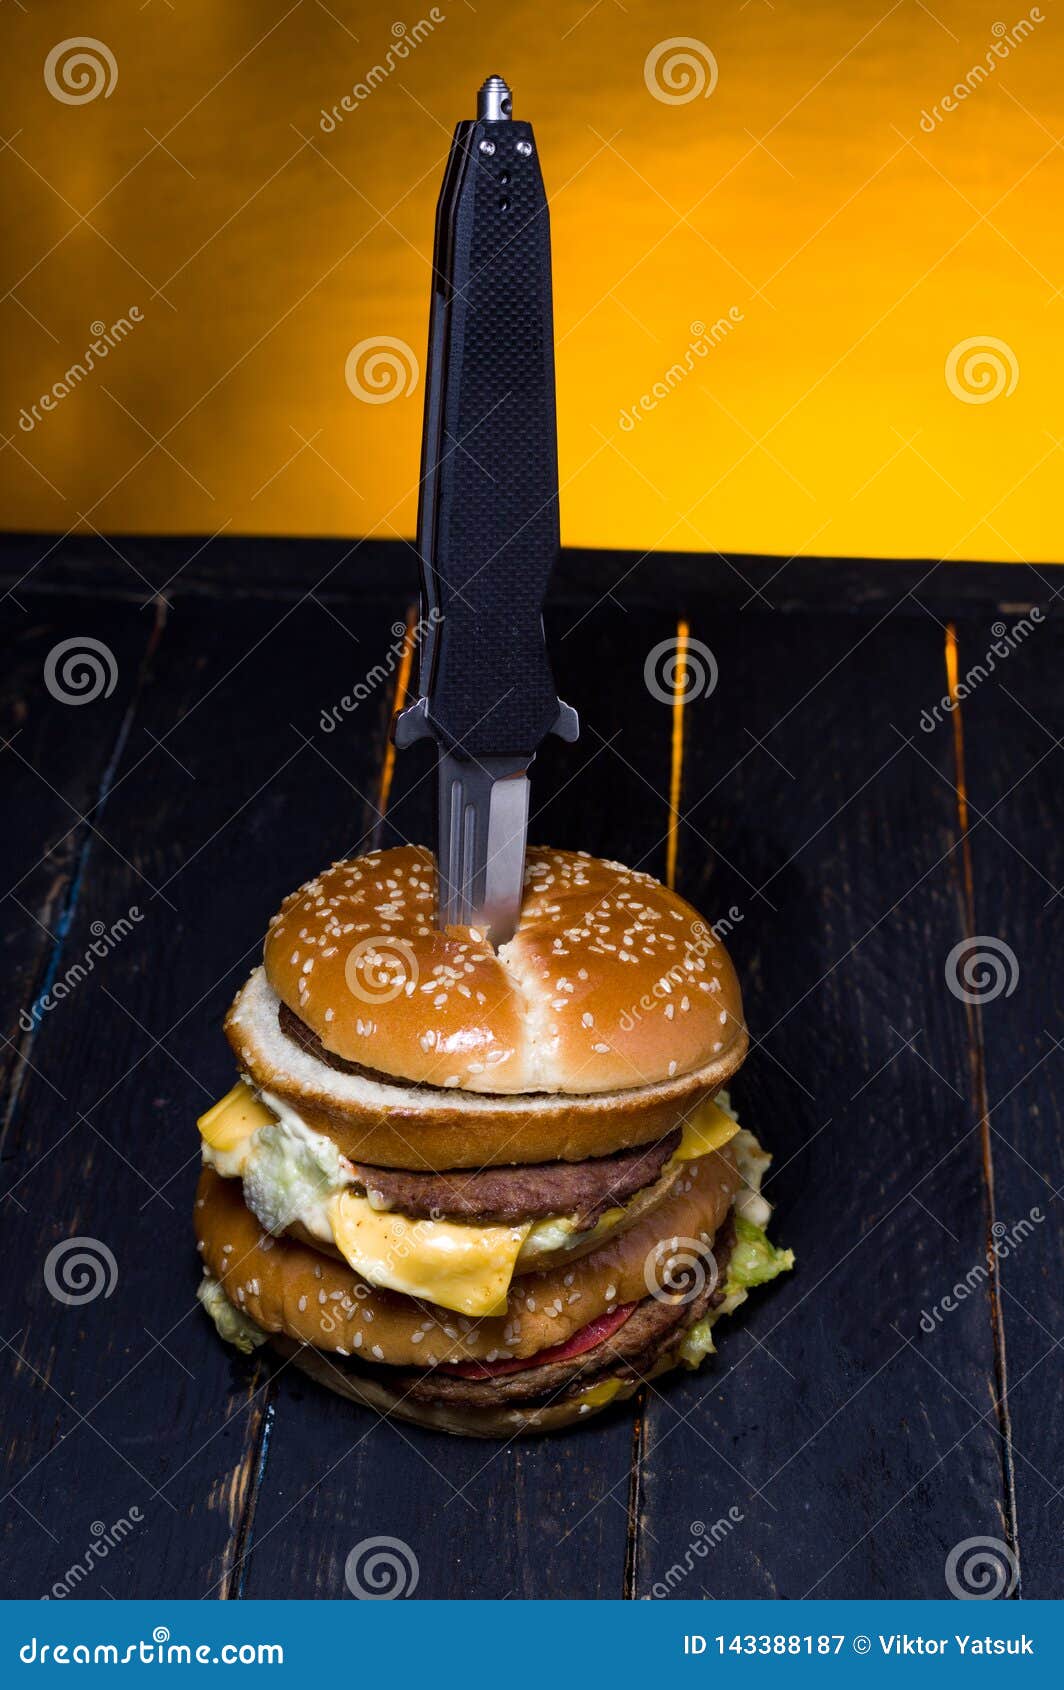 burger with meat pierced with a knife. view of the burger from above